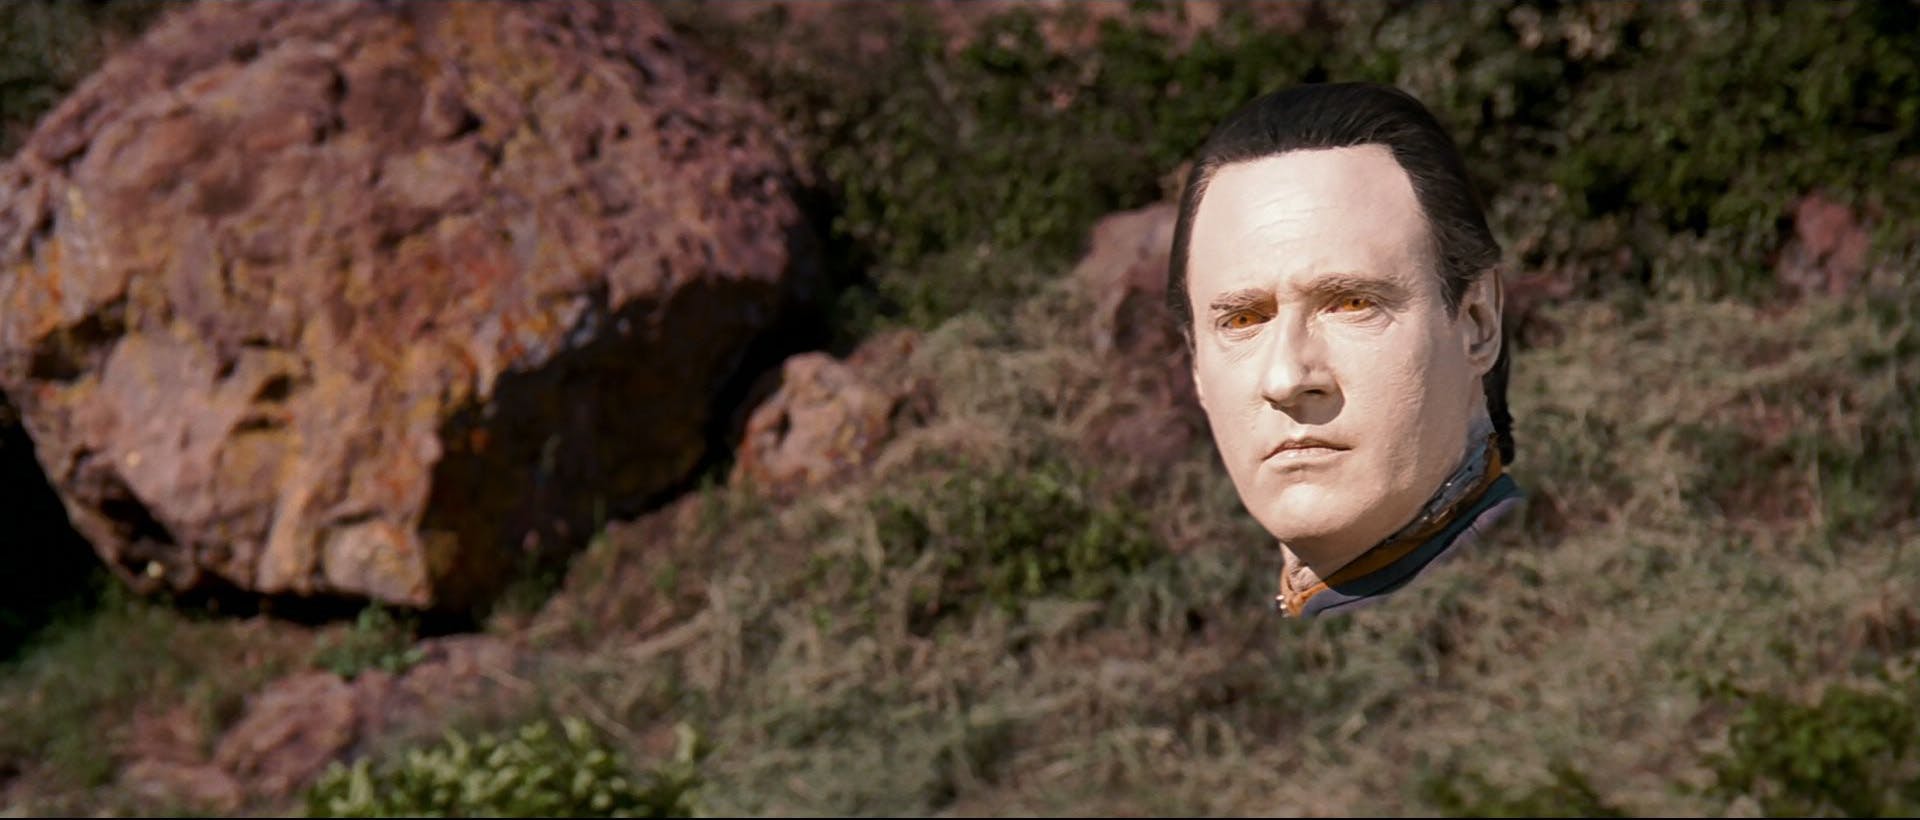 Data begins to reveal himself on the surface of the planet of Ba'ku in Star Trek: Insurrection